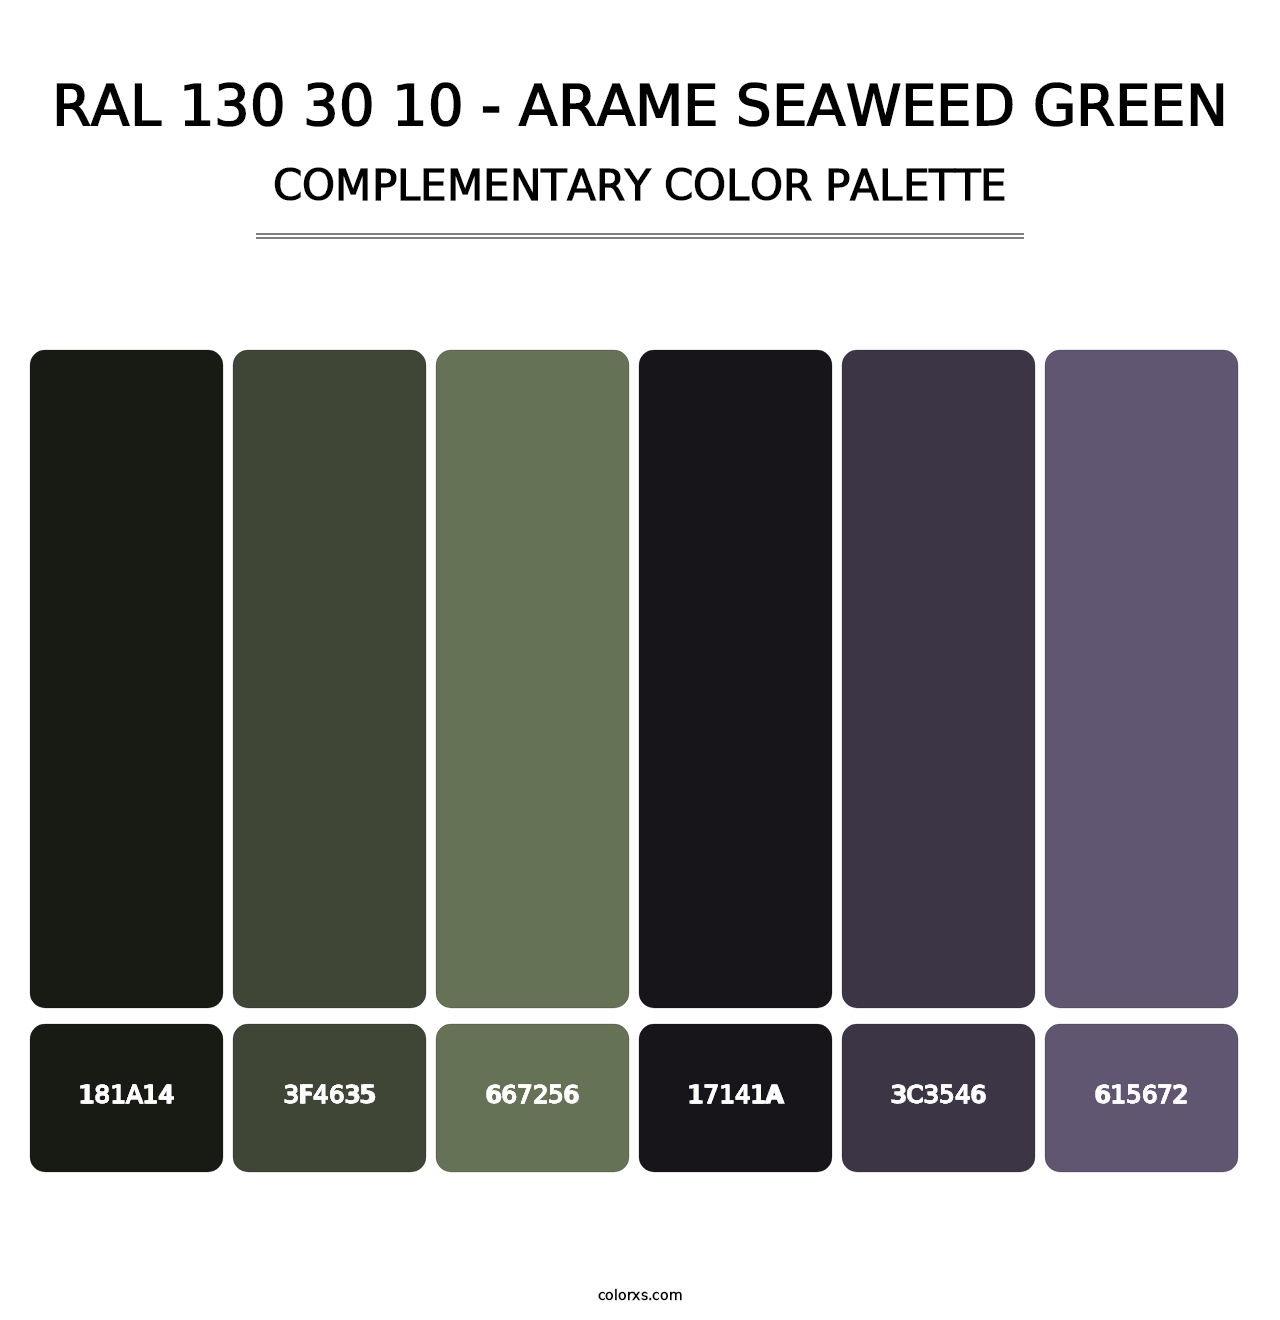 RAL 130 30 10 - Arame Seaweed Green - Complementary Color Palette